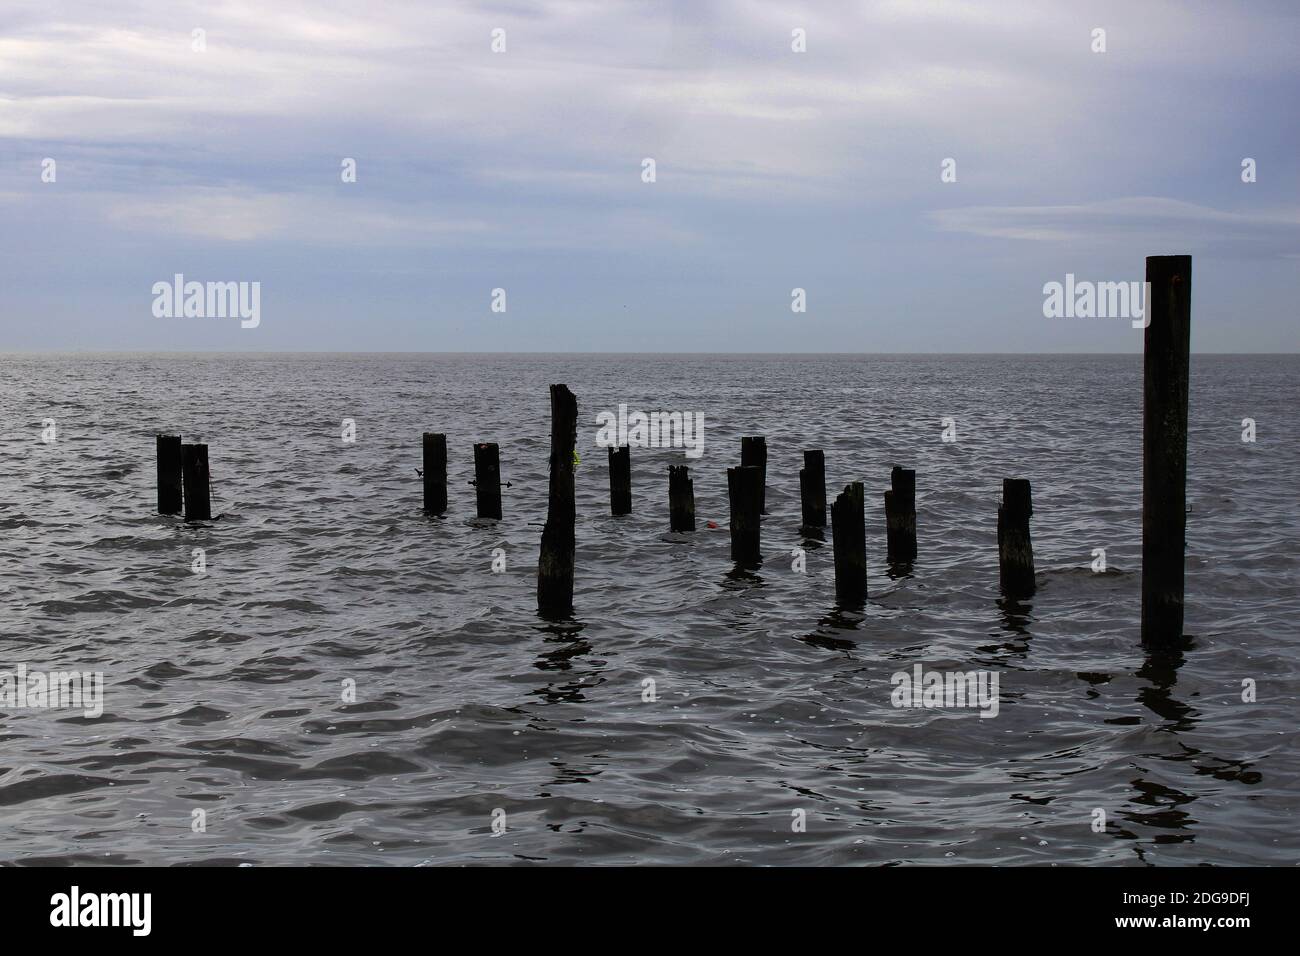 silhouette of old wooden pier posts across the water Stock Photo